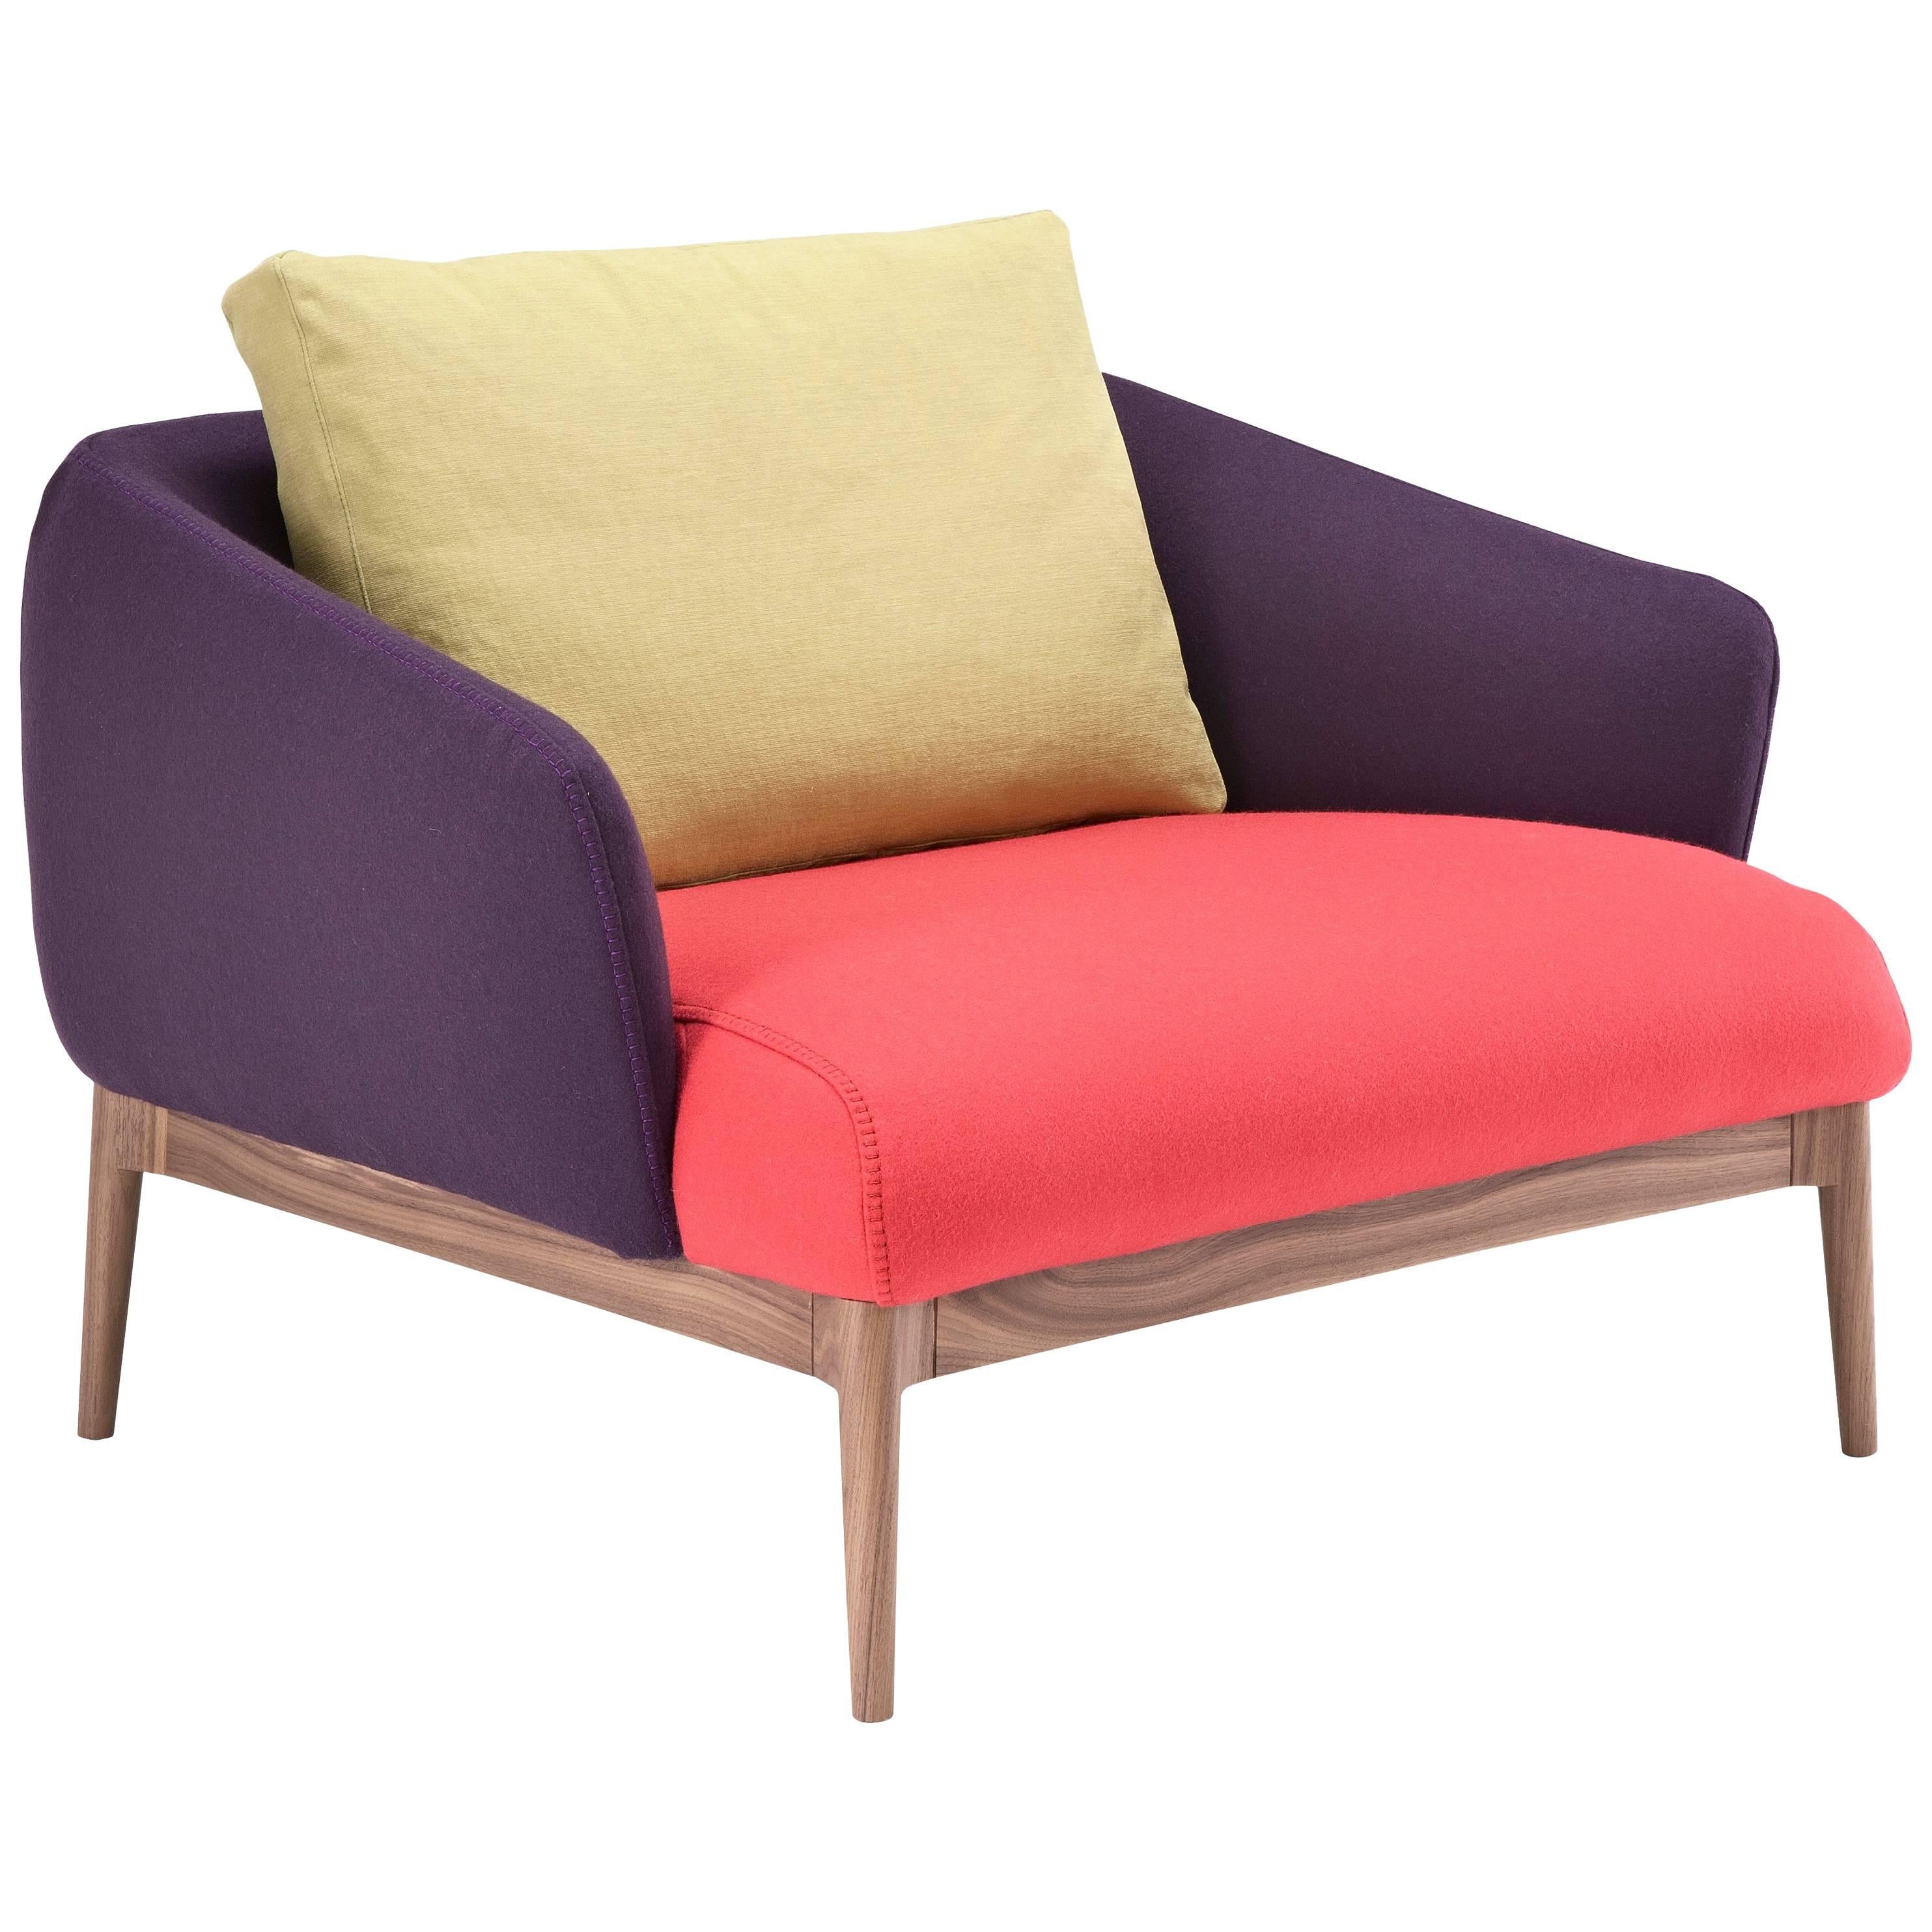 Theo Multi-Color Armchair by Maurizio Marconato & Terry Zappa For Sale